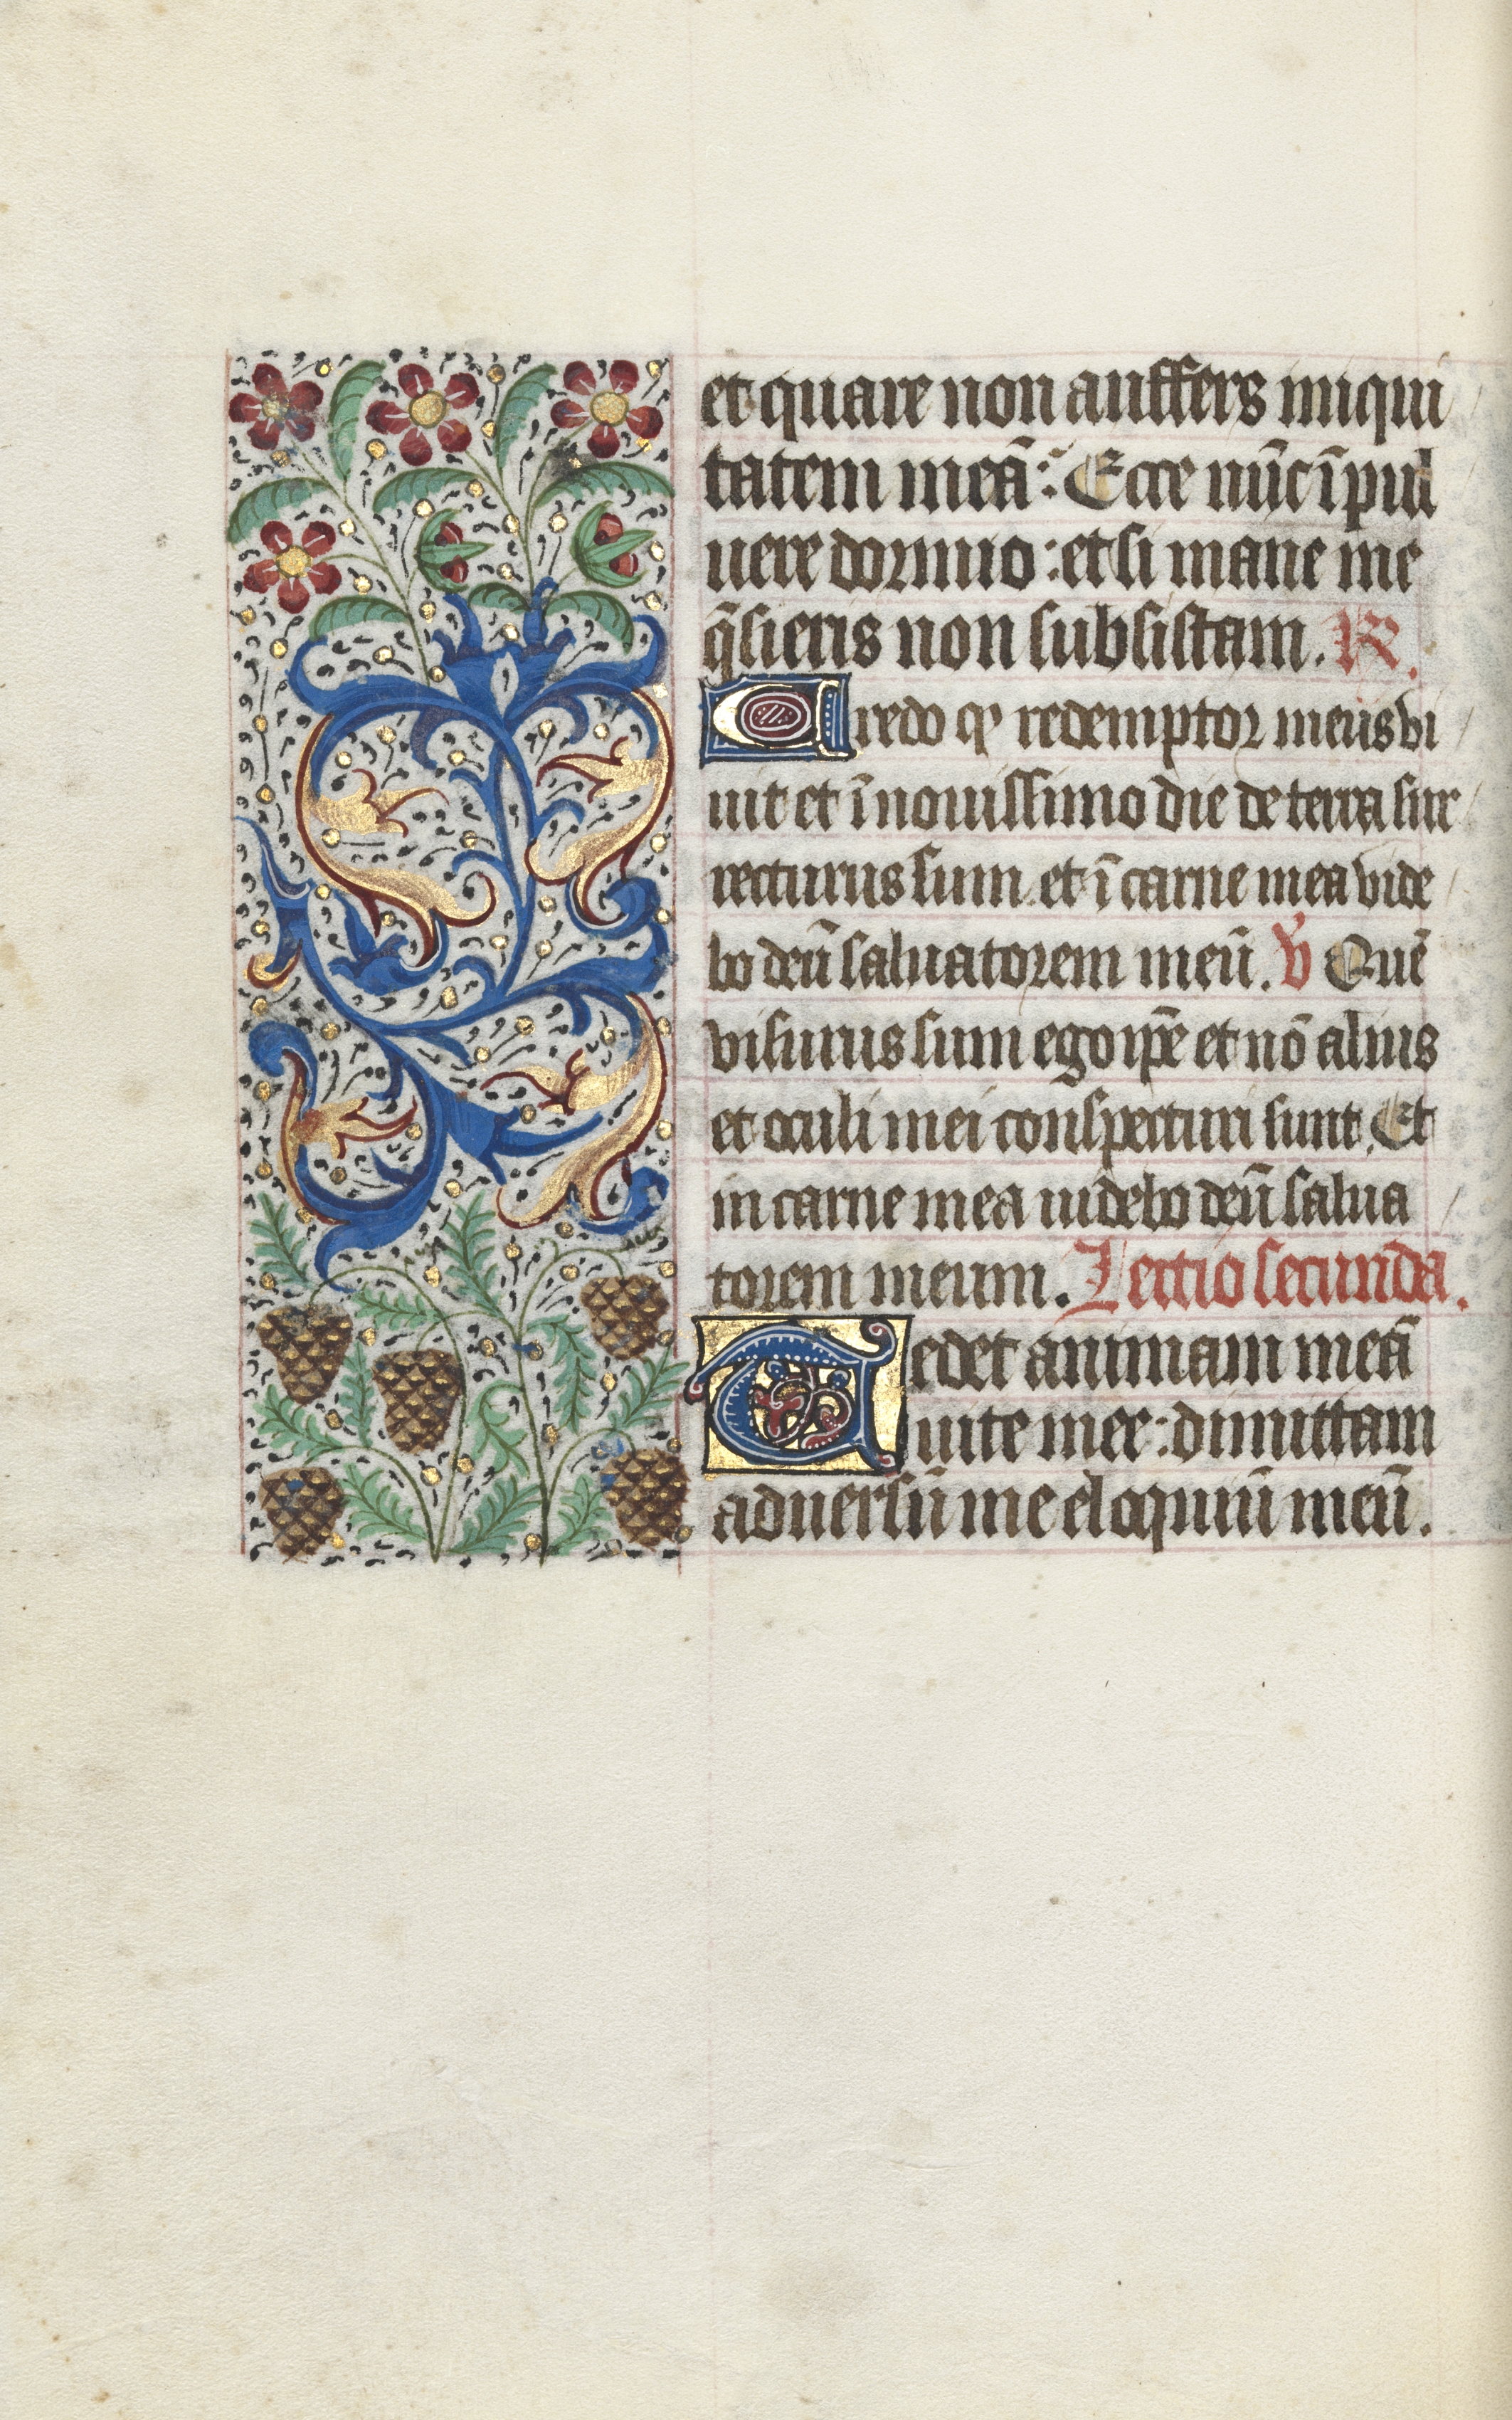 Book of Hours (Use of Rouen): fol. 115v